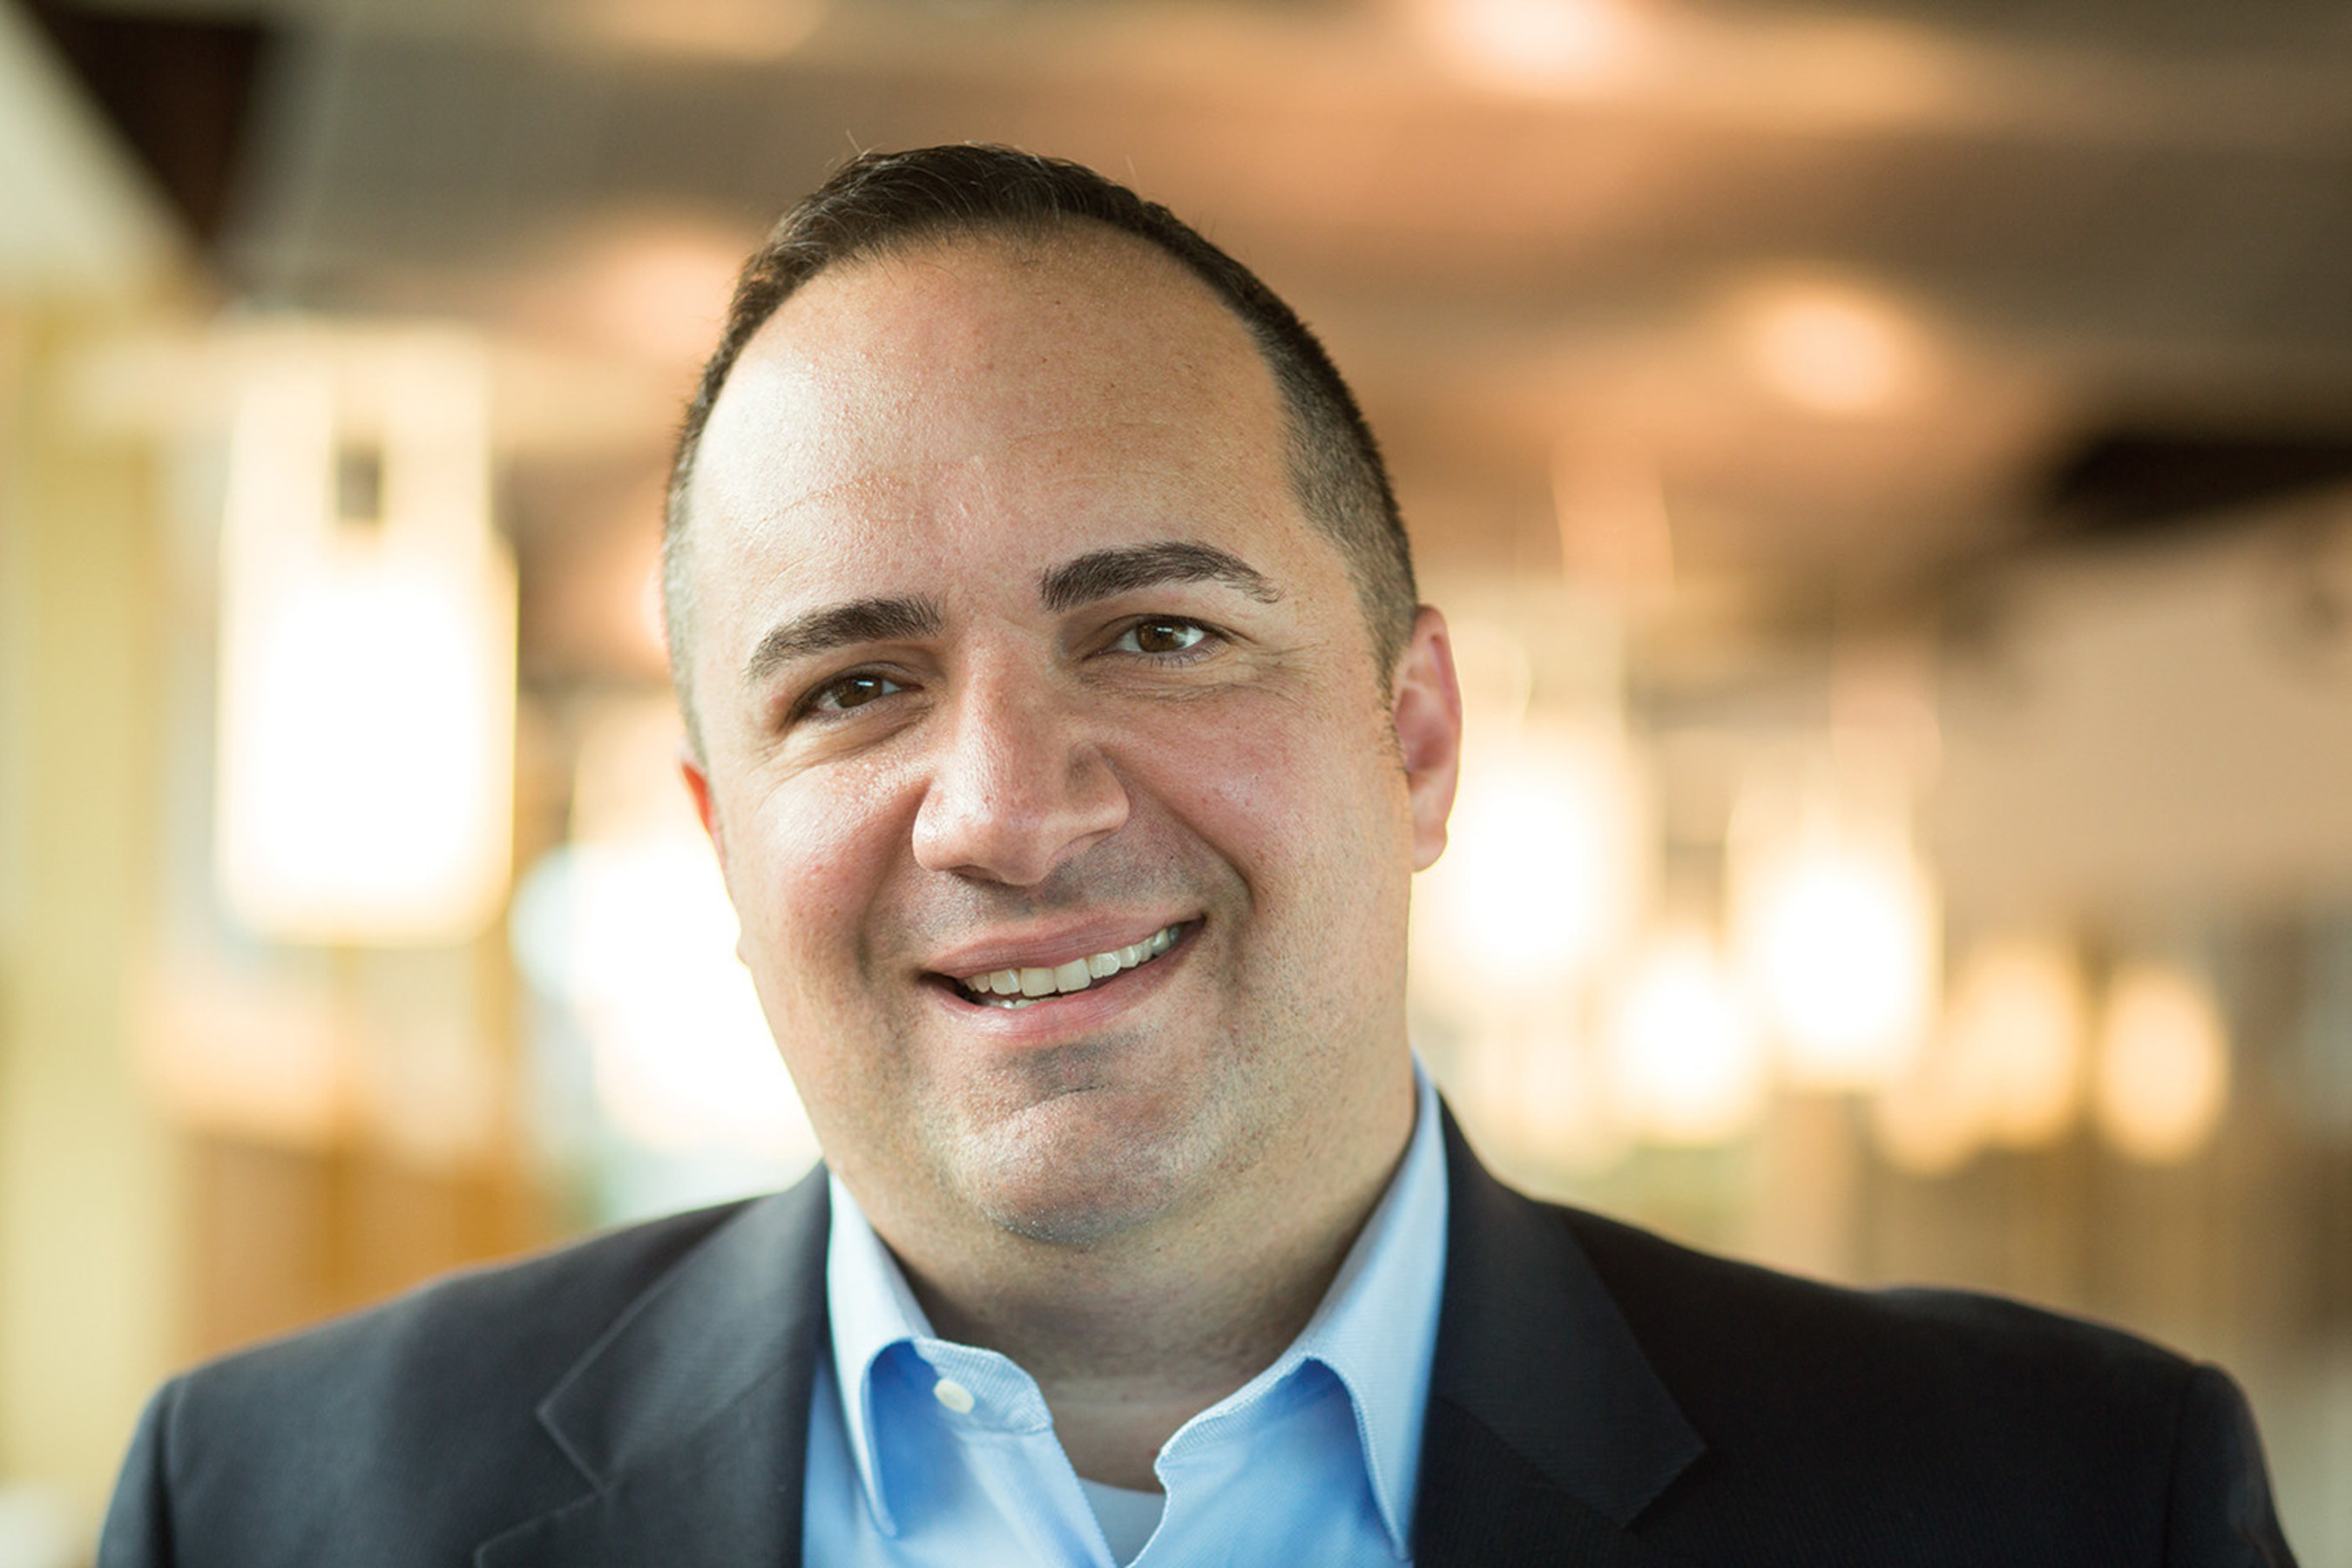 bbcon 2016 keynote speaker, Chief Communications and Marketing Officer for the UN Foundation, Aaron Sherinian